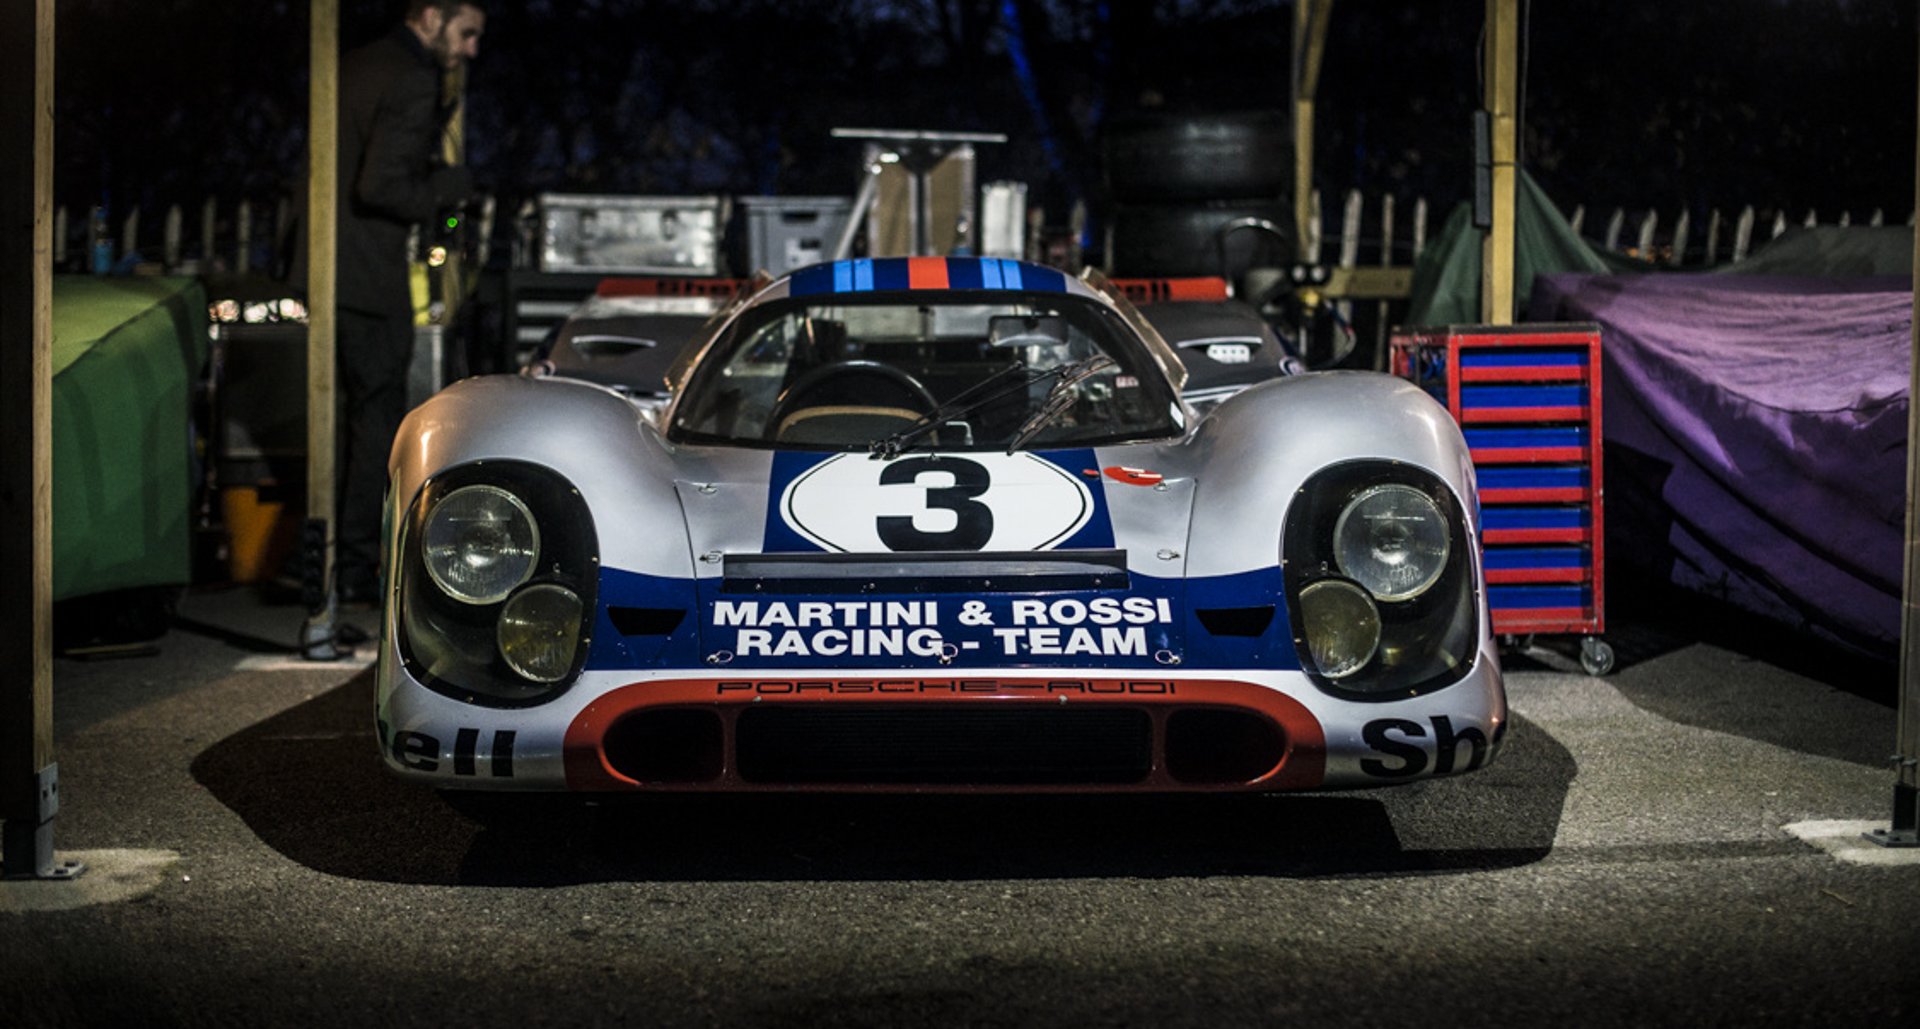 Of course Goodwood will celebrate the Porsche 917’s 50th birthday ...